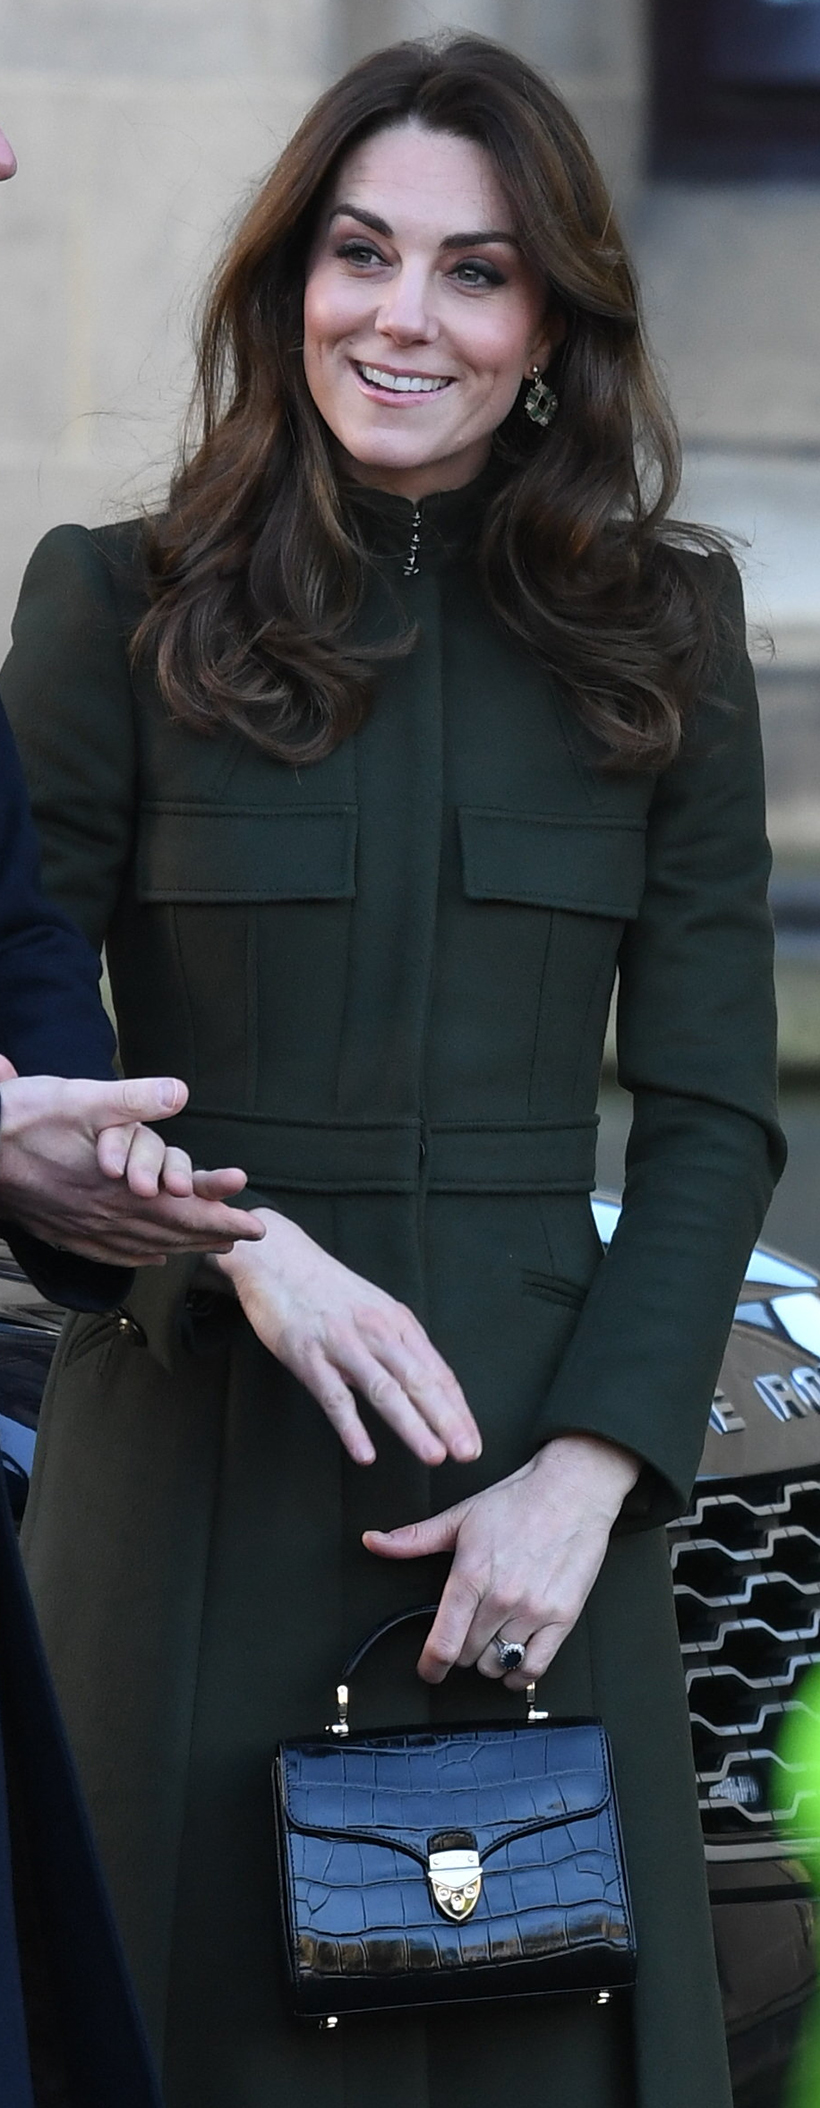 The Princess of Wales (Kate Middleton) wearing a dark green coat carrying a black croc bag—it's the Aspinal of London Mayfair Midi bag